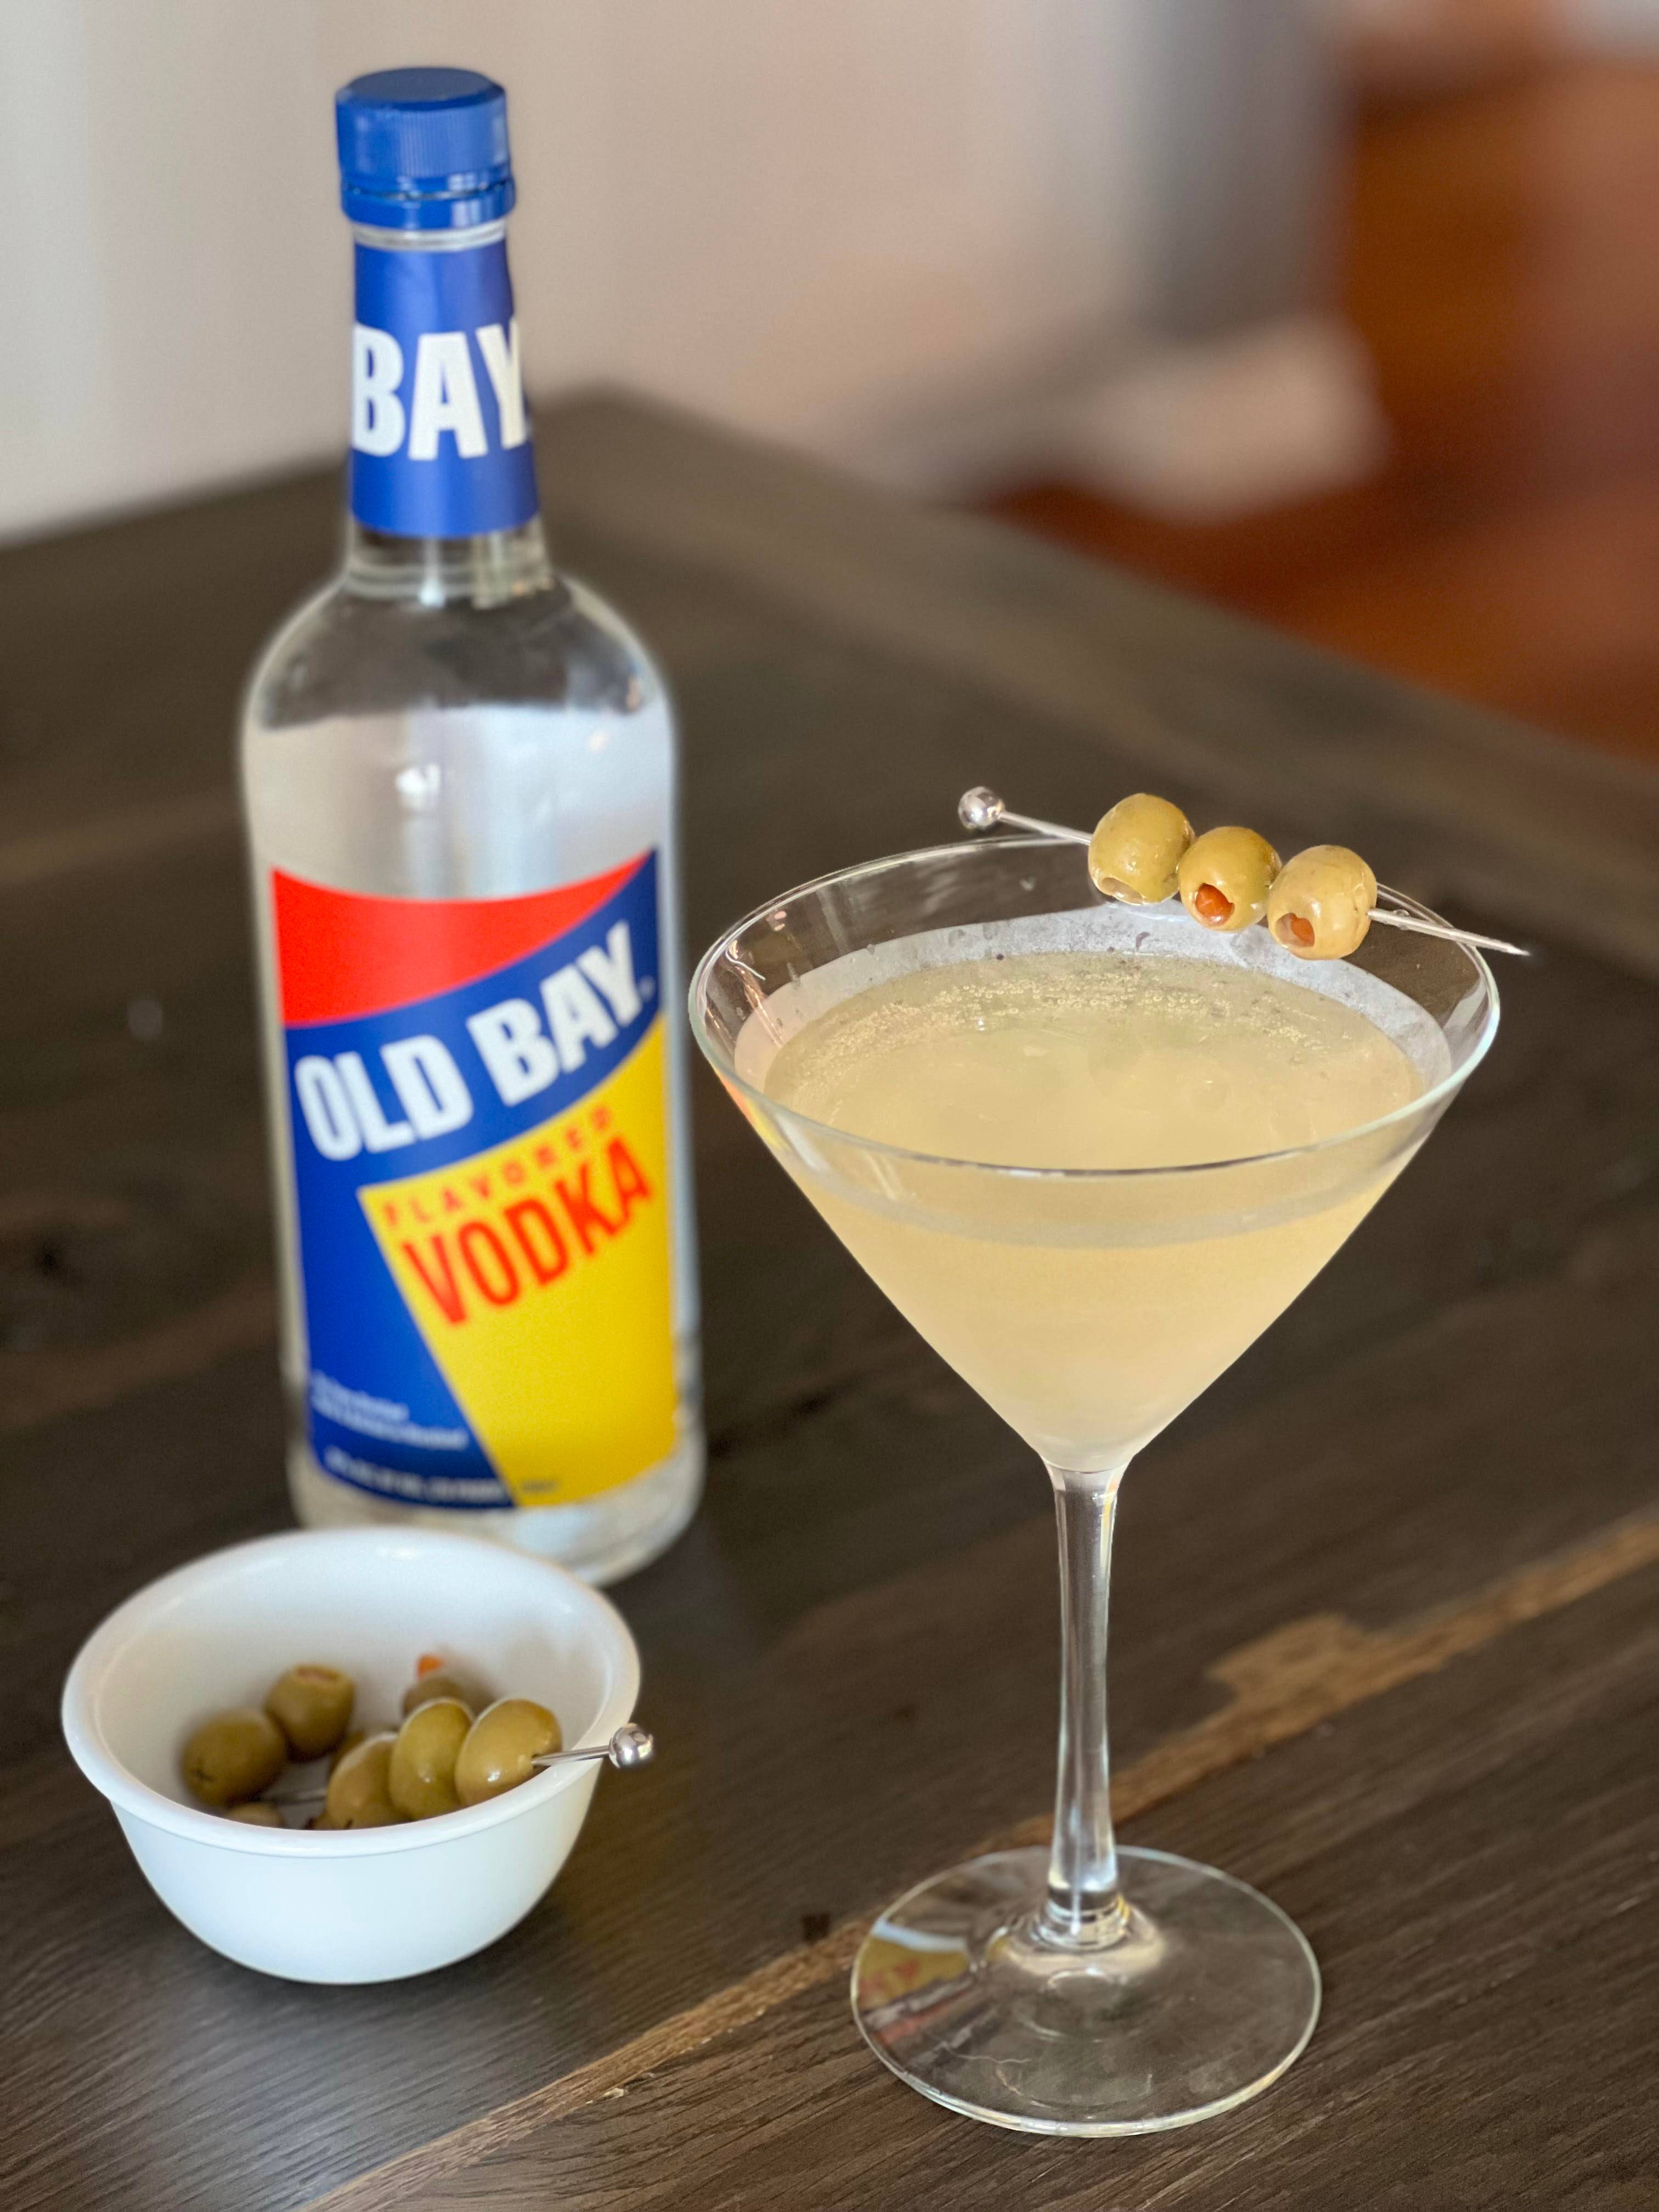 dirty martini with old bay vodka bottle